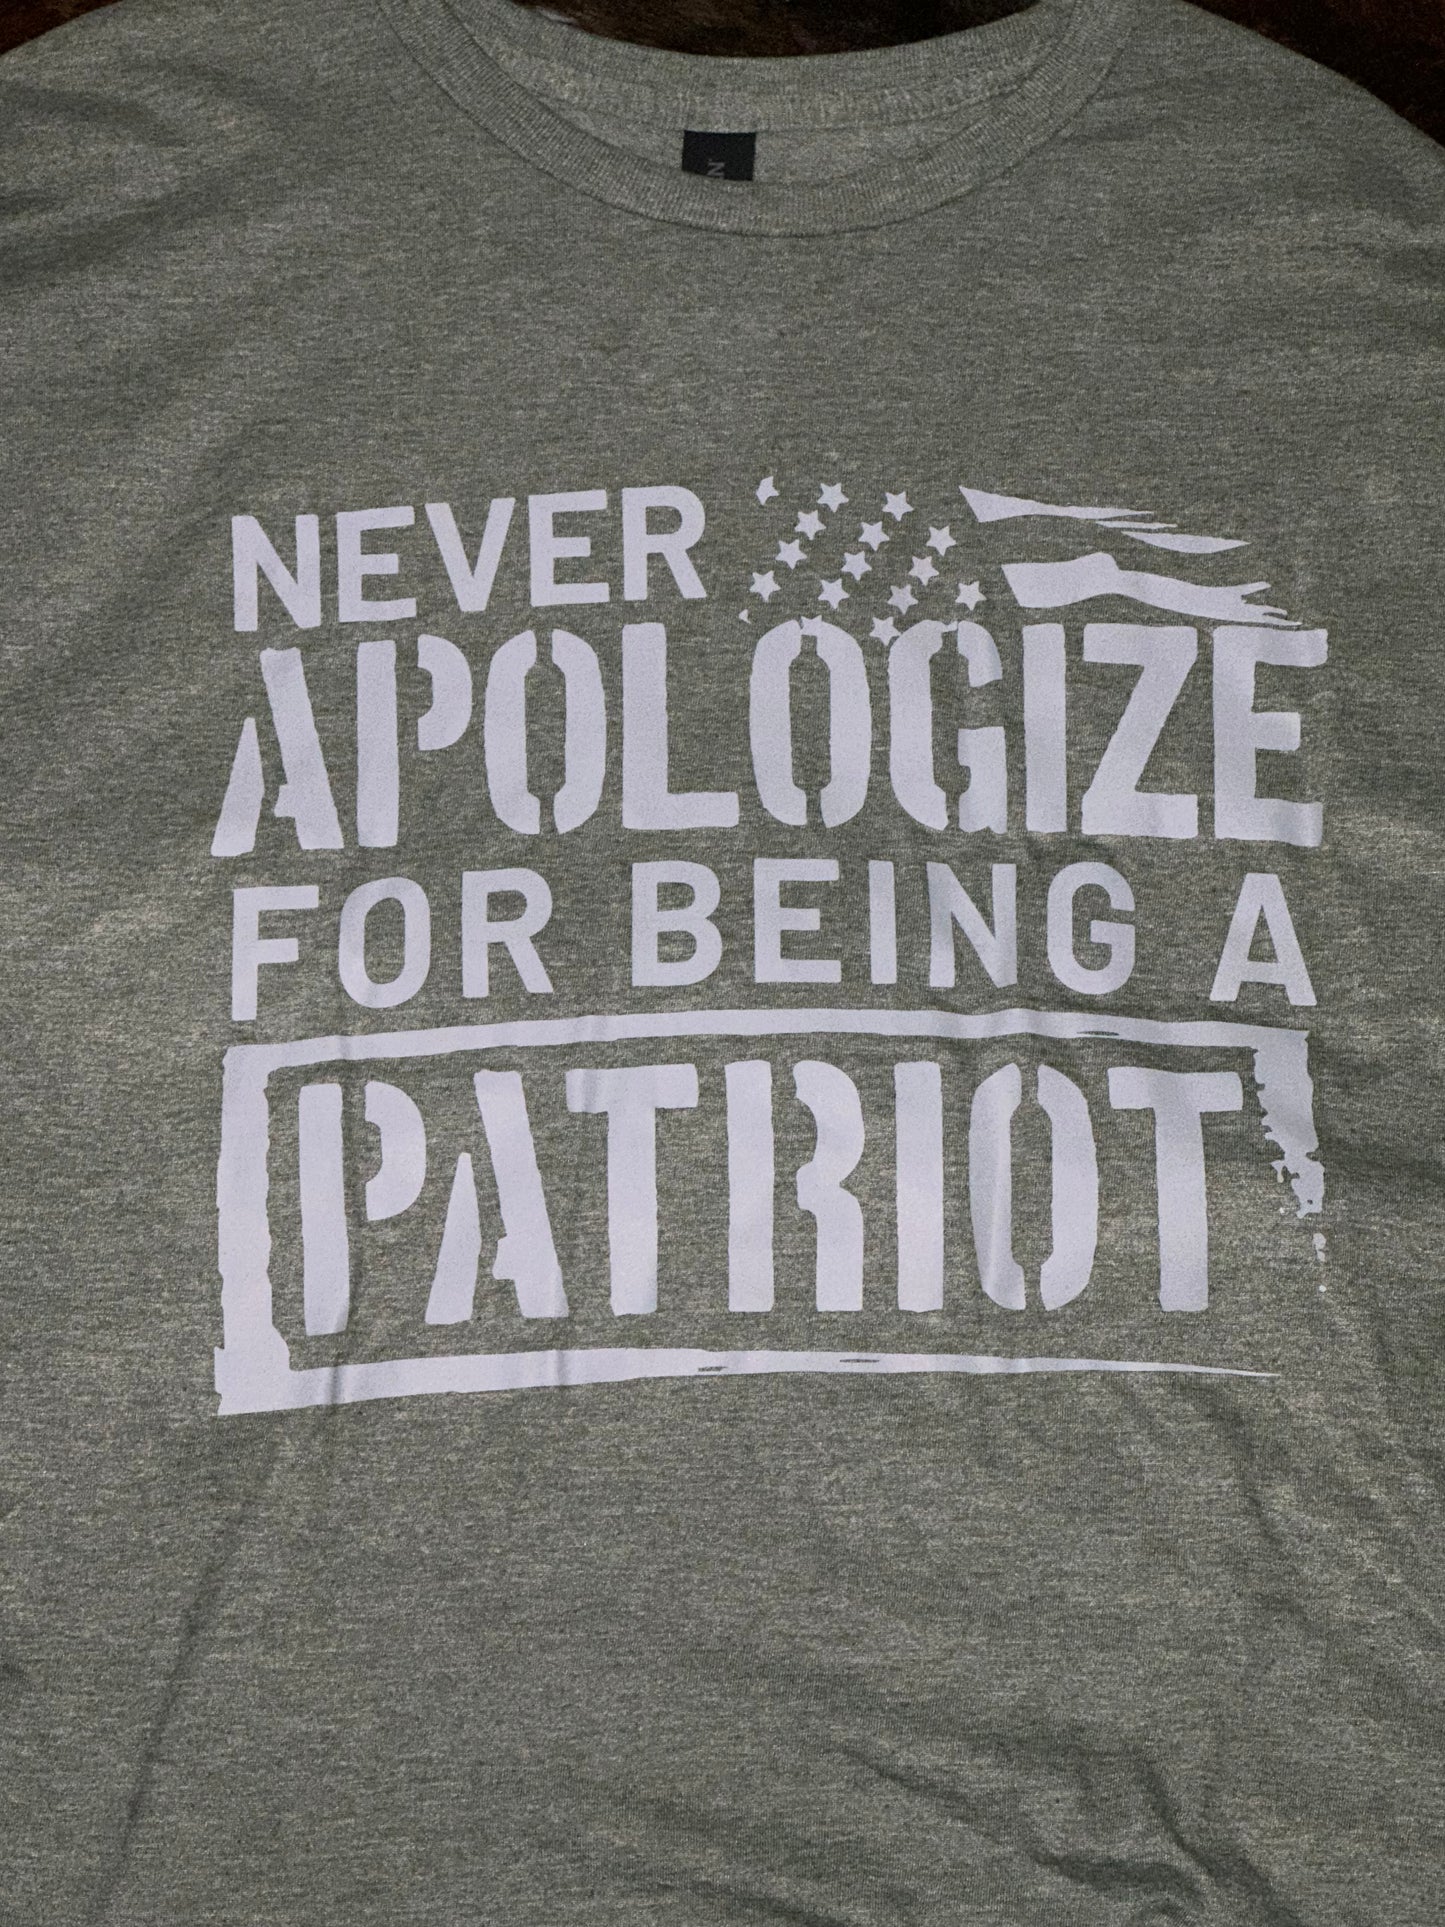 Never apologize rts